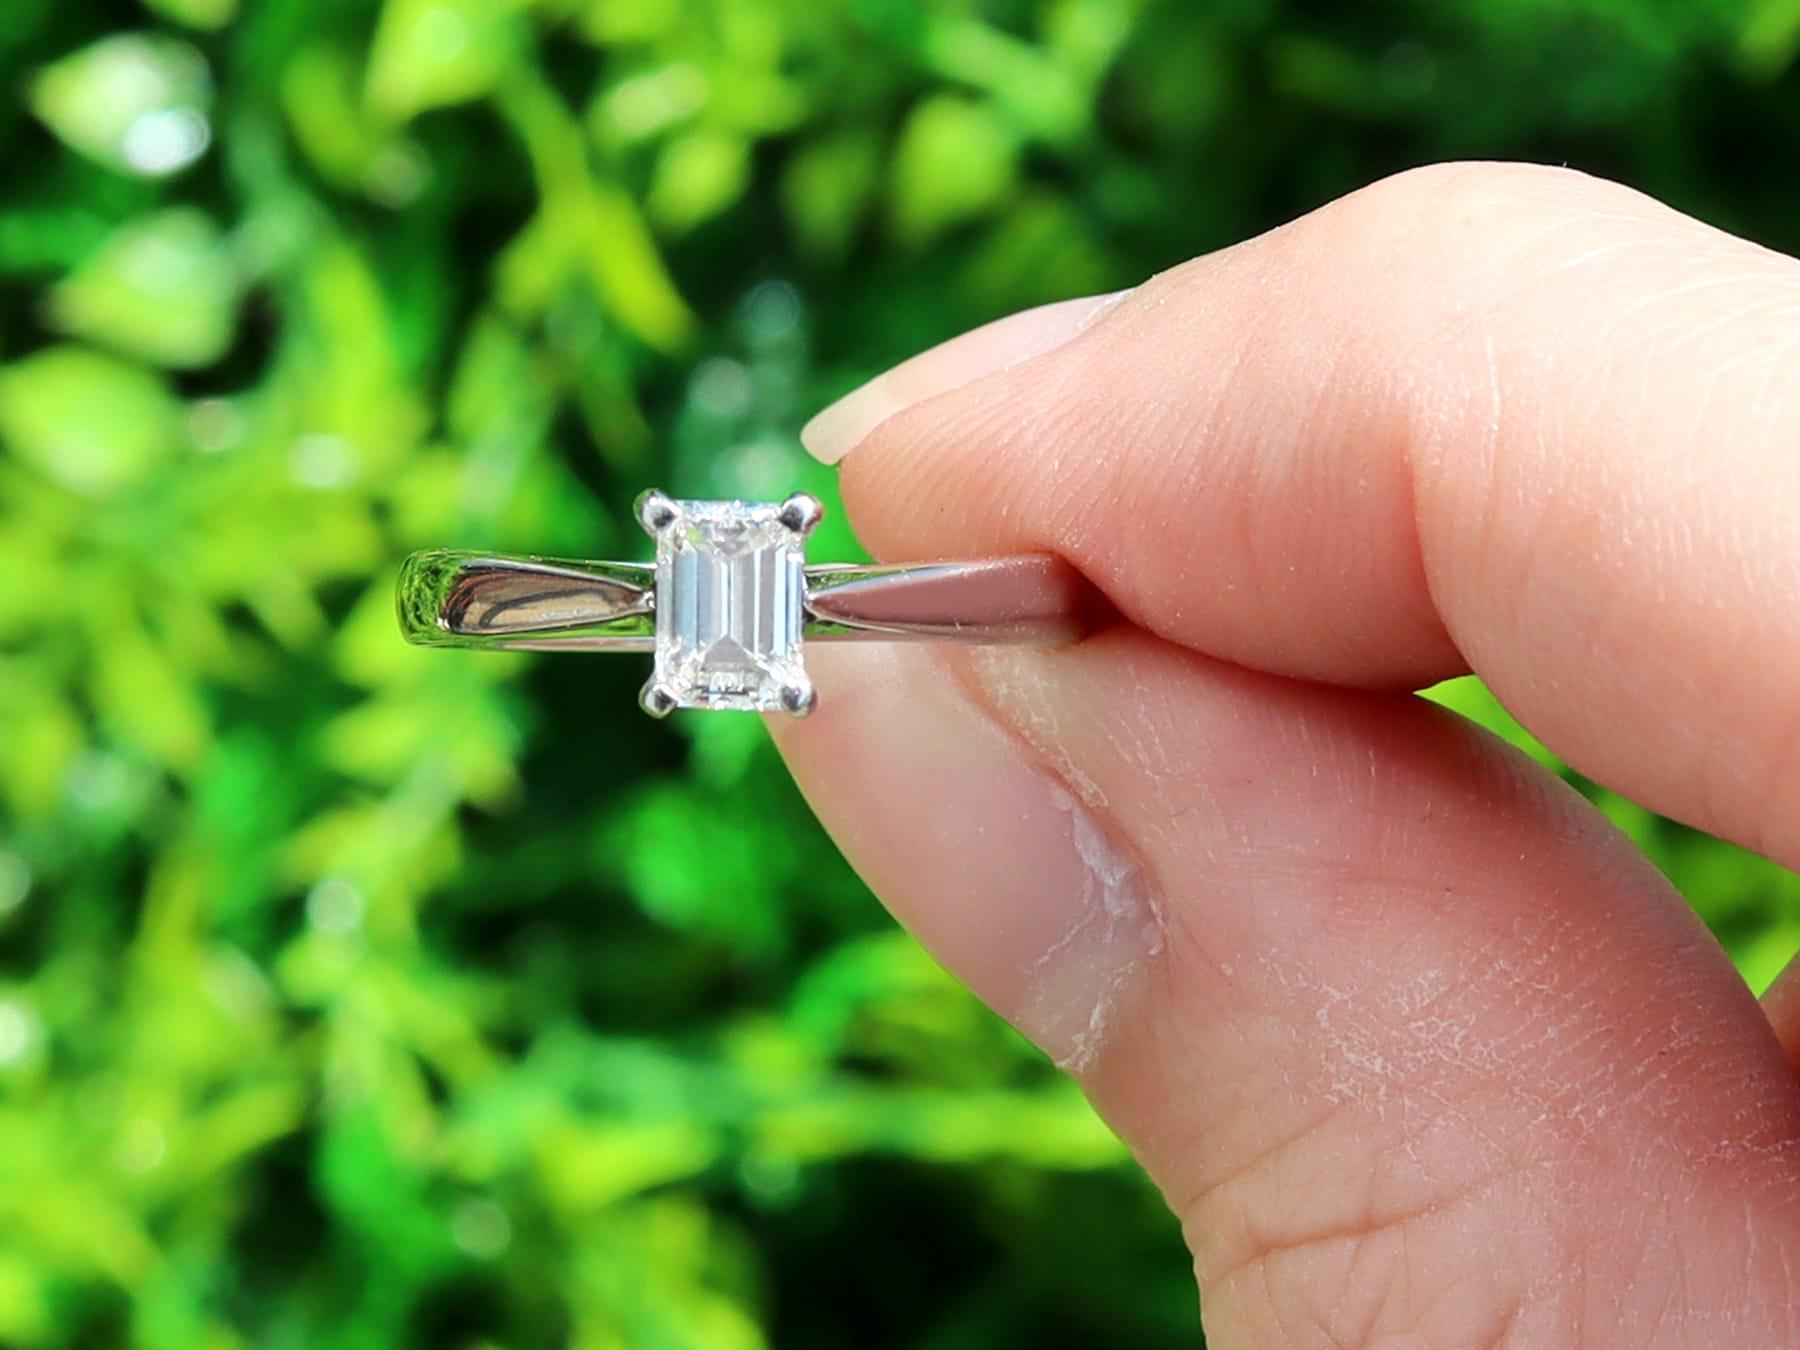 A fine 0.33 carat emerald cut diamond and platinum solitaire ring; part of our contemporary jewelry / estate jewelry collection

This fine contemporary emerald cut diamond solitaire ring has been crafted in platinum.

The ring displays a four claw /